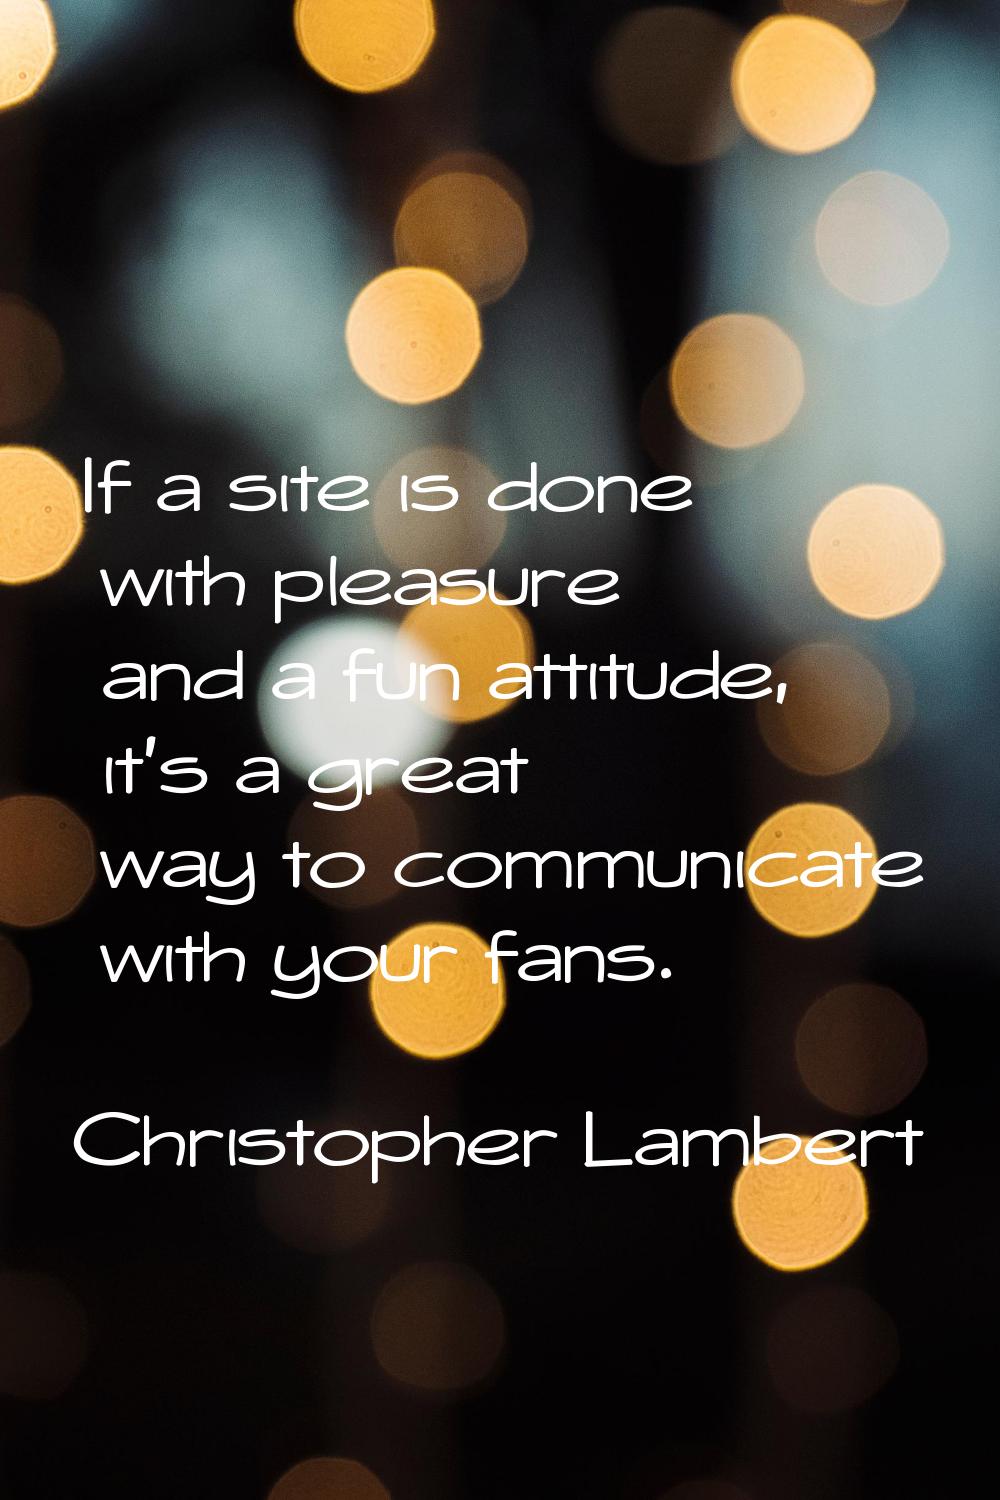 If a site is done with pleasure and a fun attitude, it's a great way to communicate with your fans.